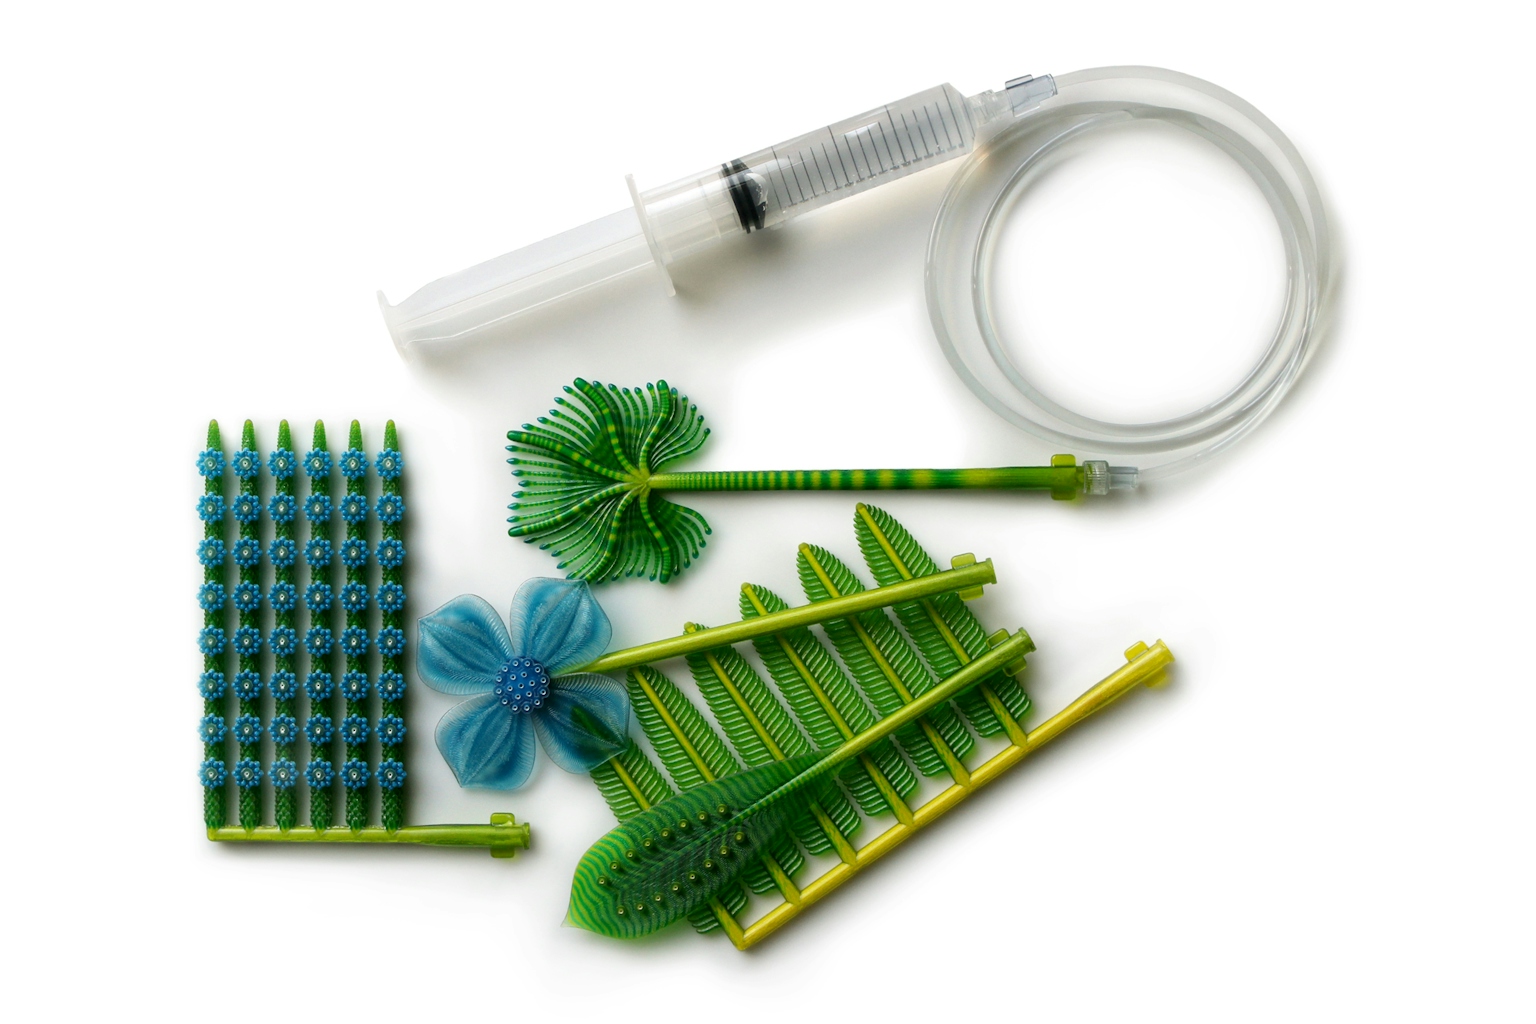 Top view of 3D printed plant-like forms with syringe and tubing.